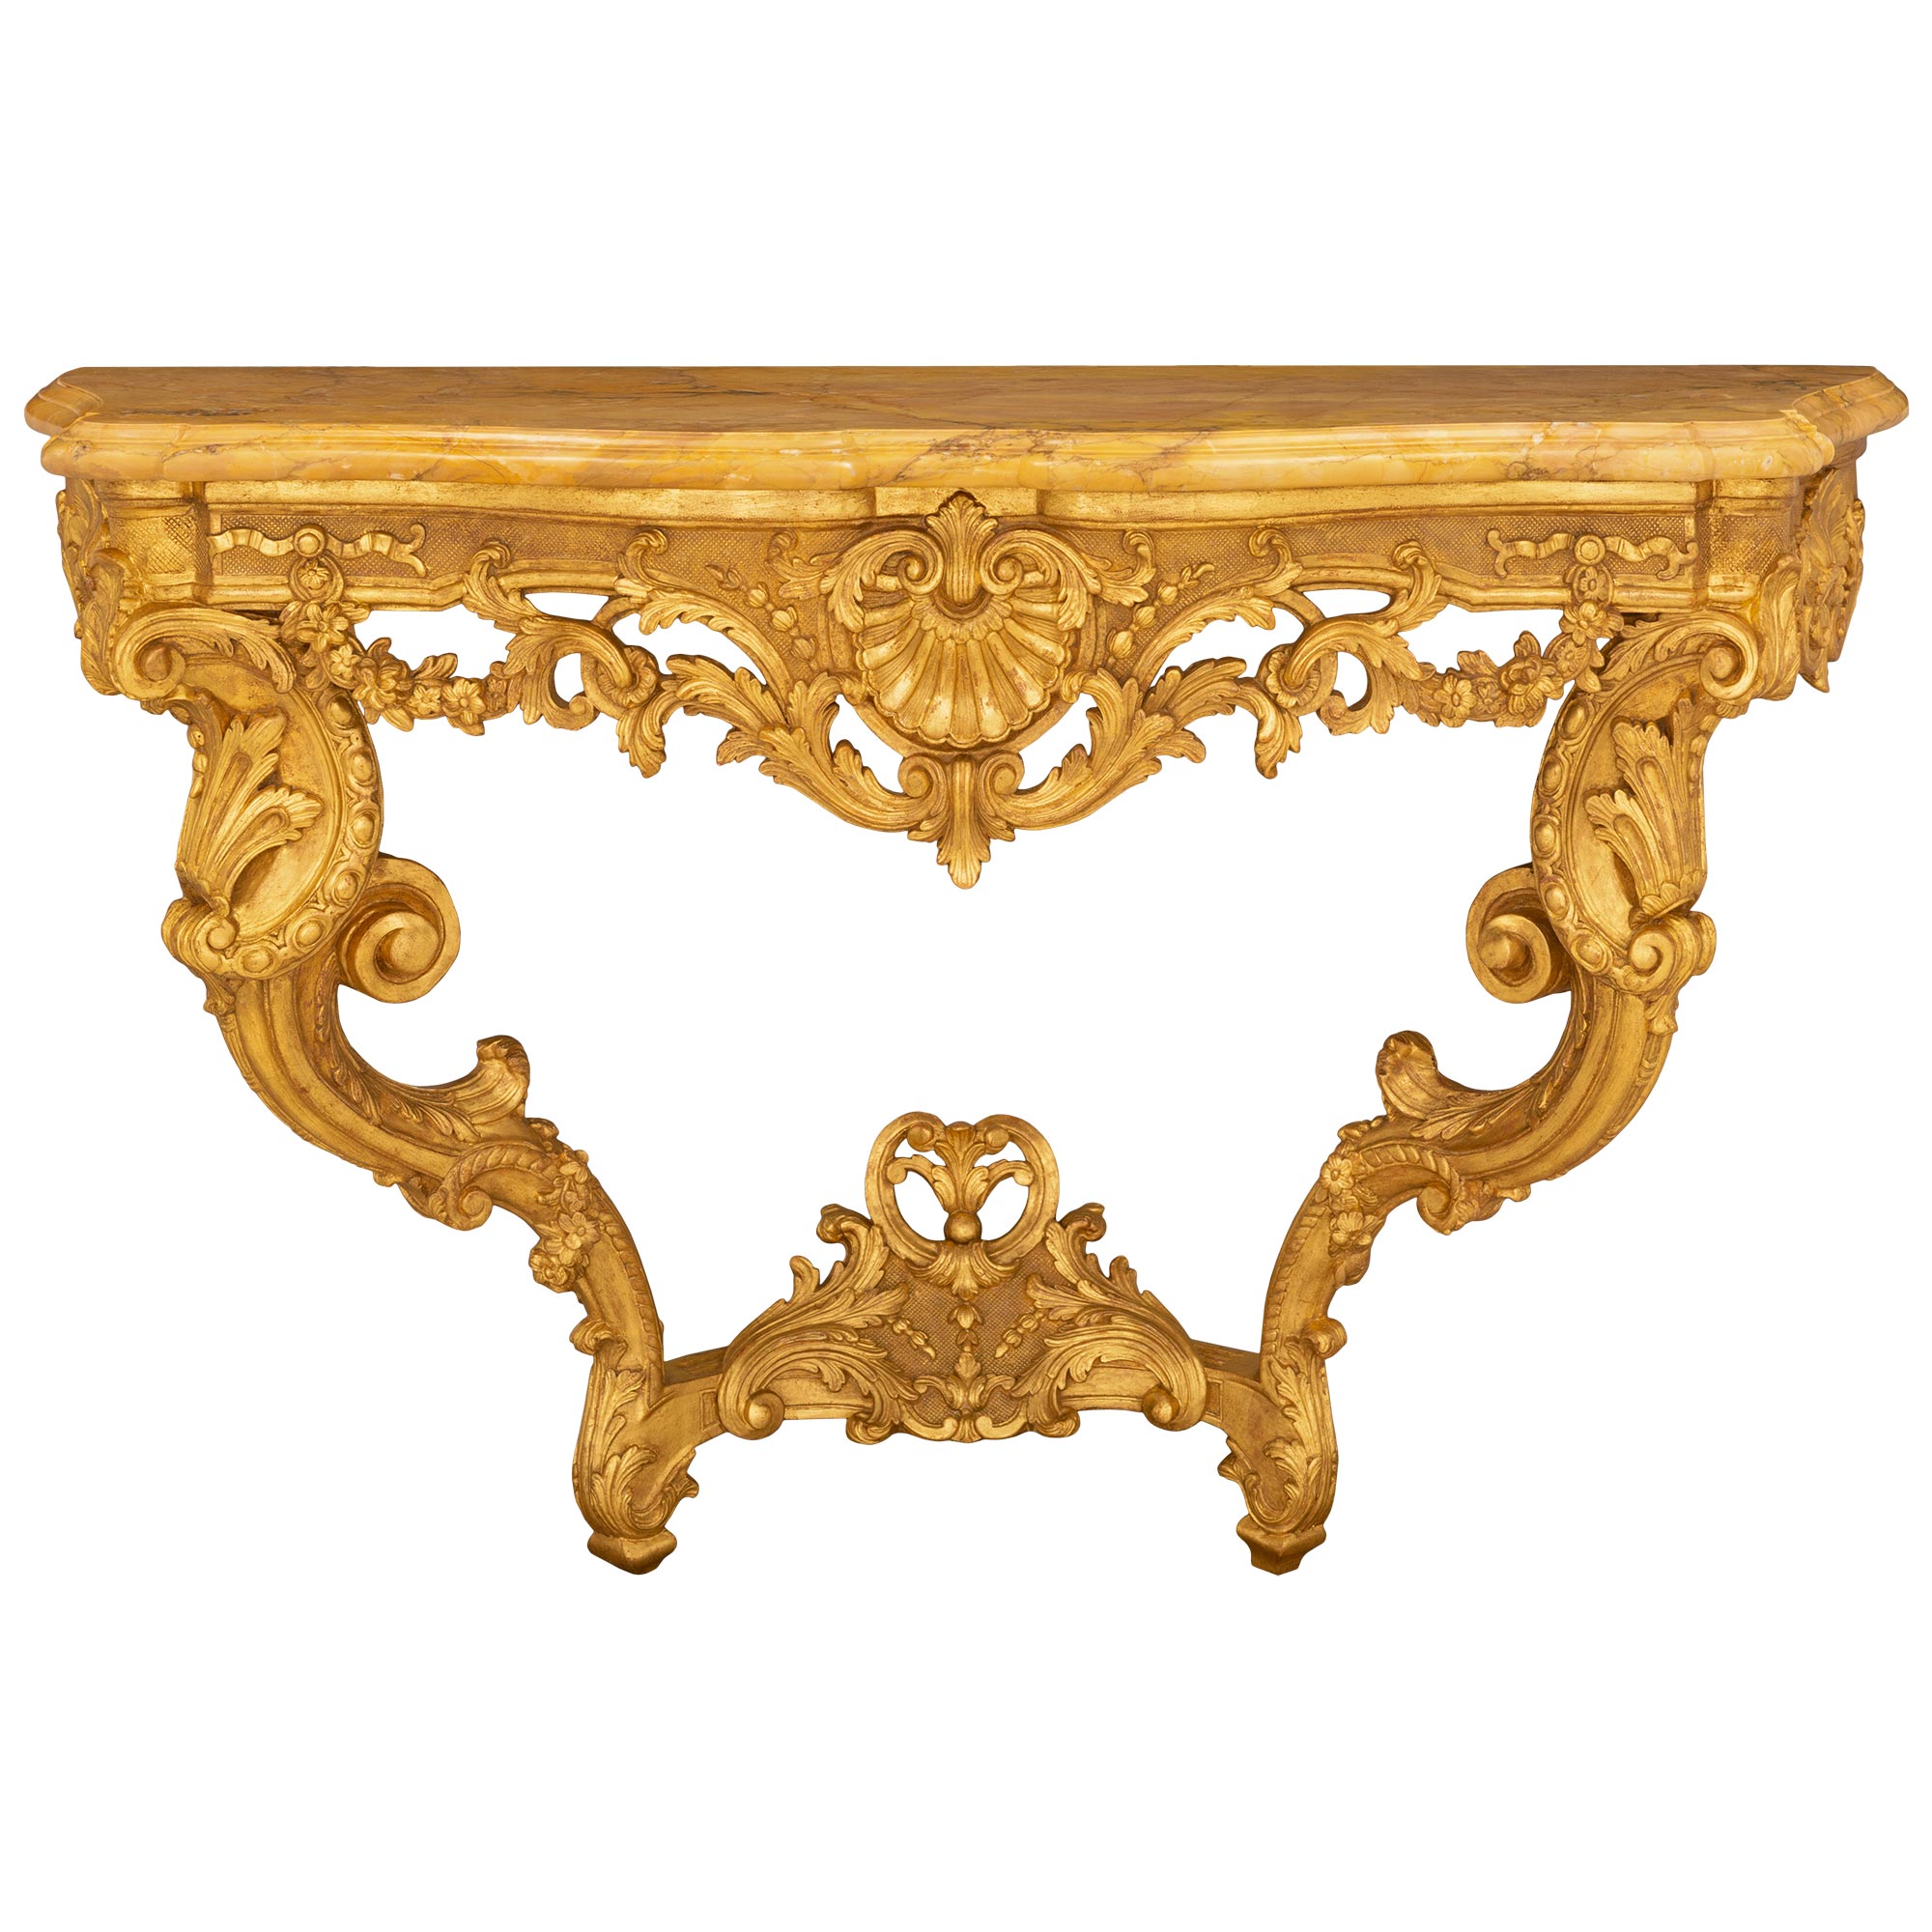 French 18th Century Régence Period Giltwood and Sienna Marble Console Circa 1720